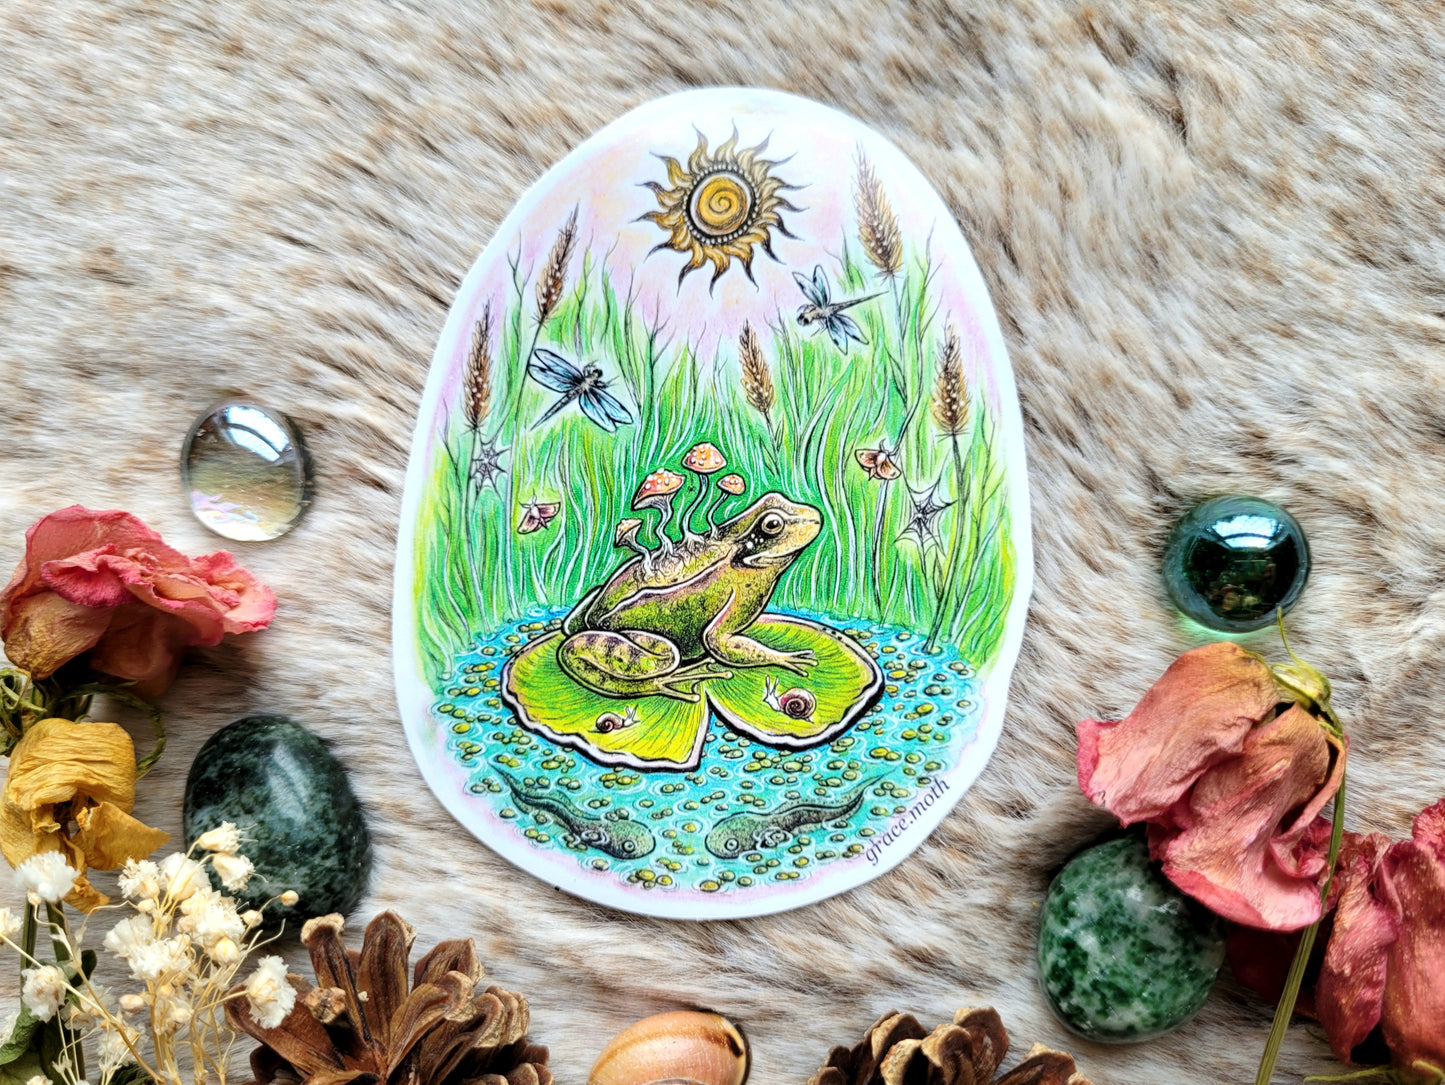 Frog on Lily Pad - Vinyl Sticker 10cm - Cottagecore - Witchy - Gothic - Illustrated by Grace moth